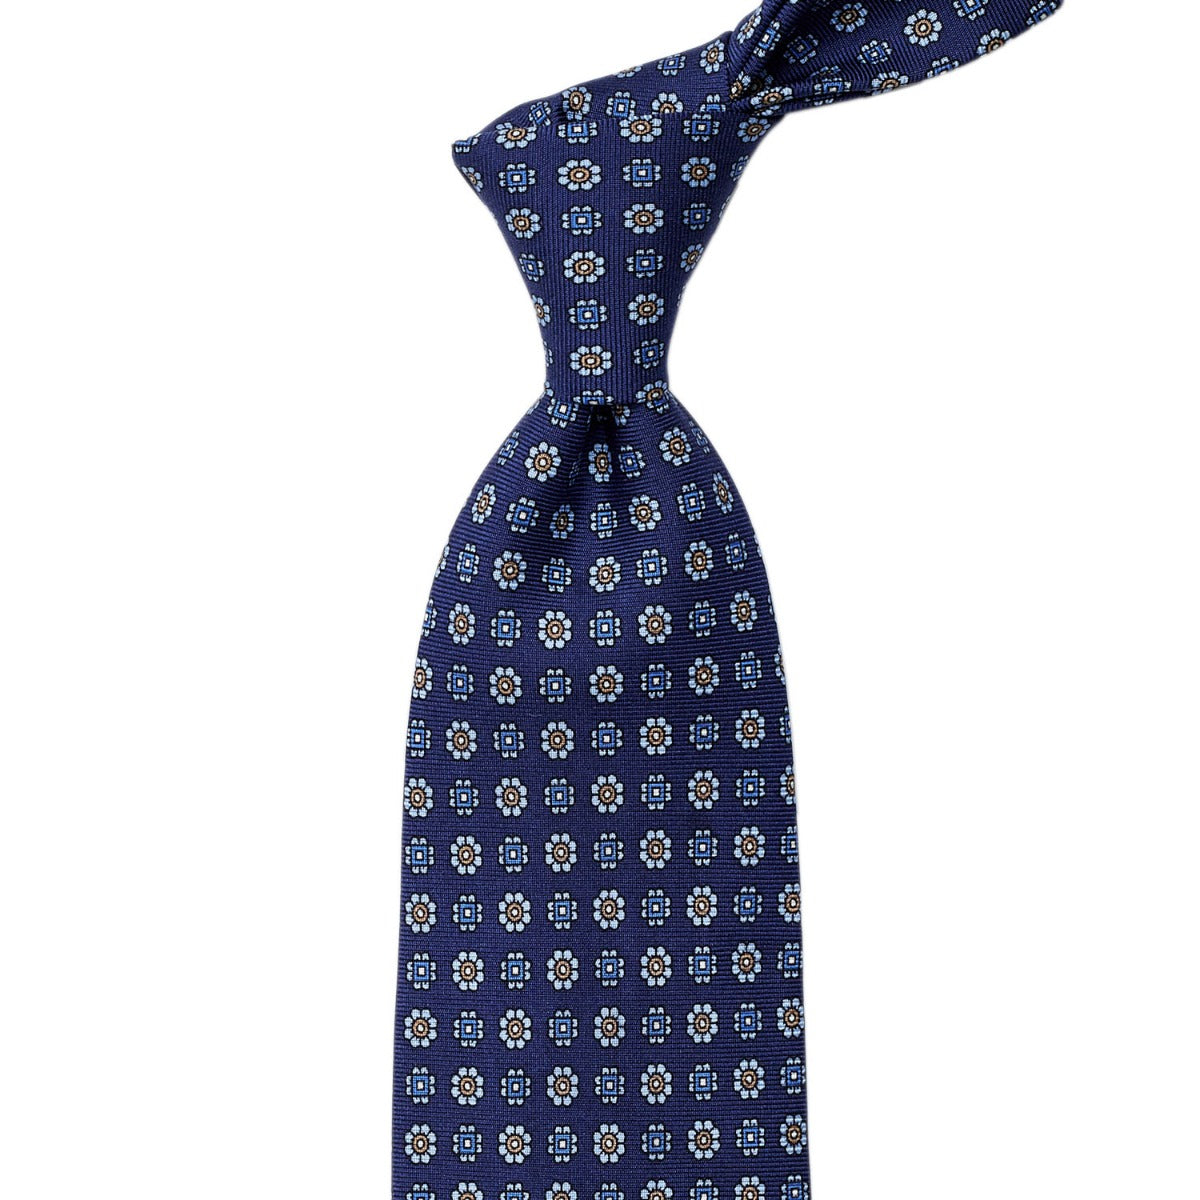 A Sovereign Grade Navy Floral 36oz Printed Silk Tie by KirbyAllison.com, handmade with a floral pattern, made from 100% English silk.